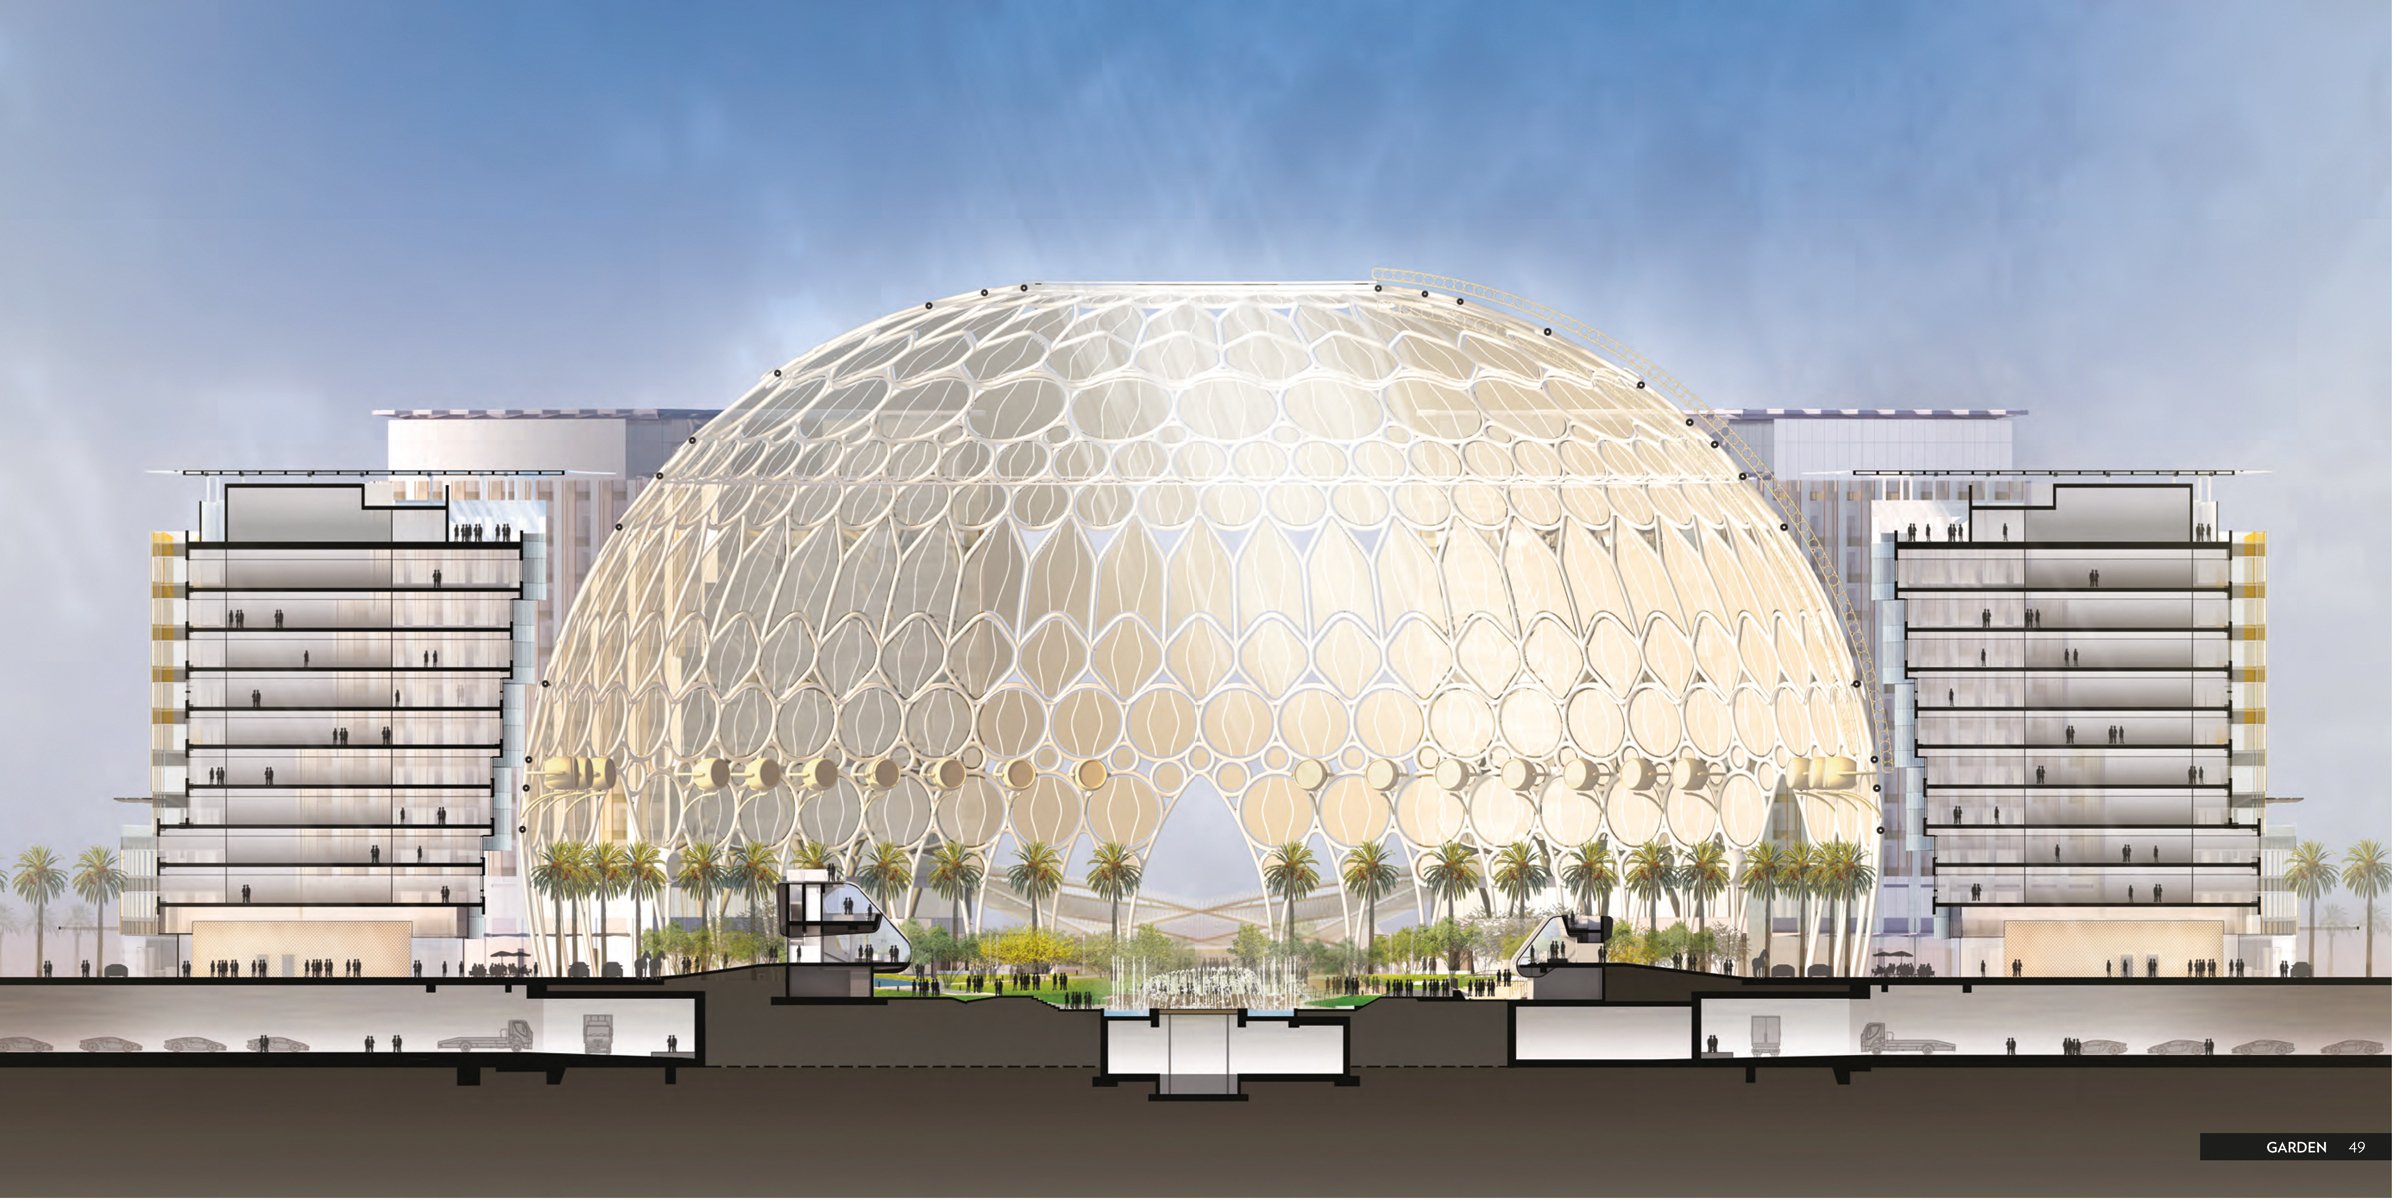 Gold cover with white geometrical spiral latticed pattern overlaid and Al Wasl Plaza Dubai Expo 2020 in white font in centre